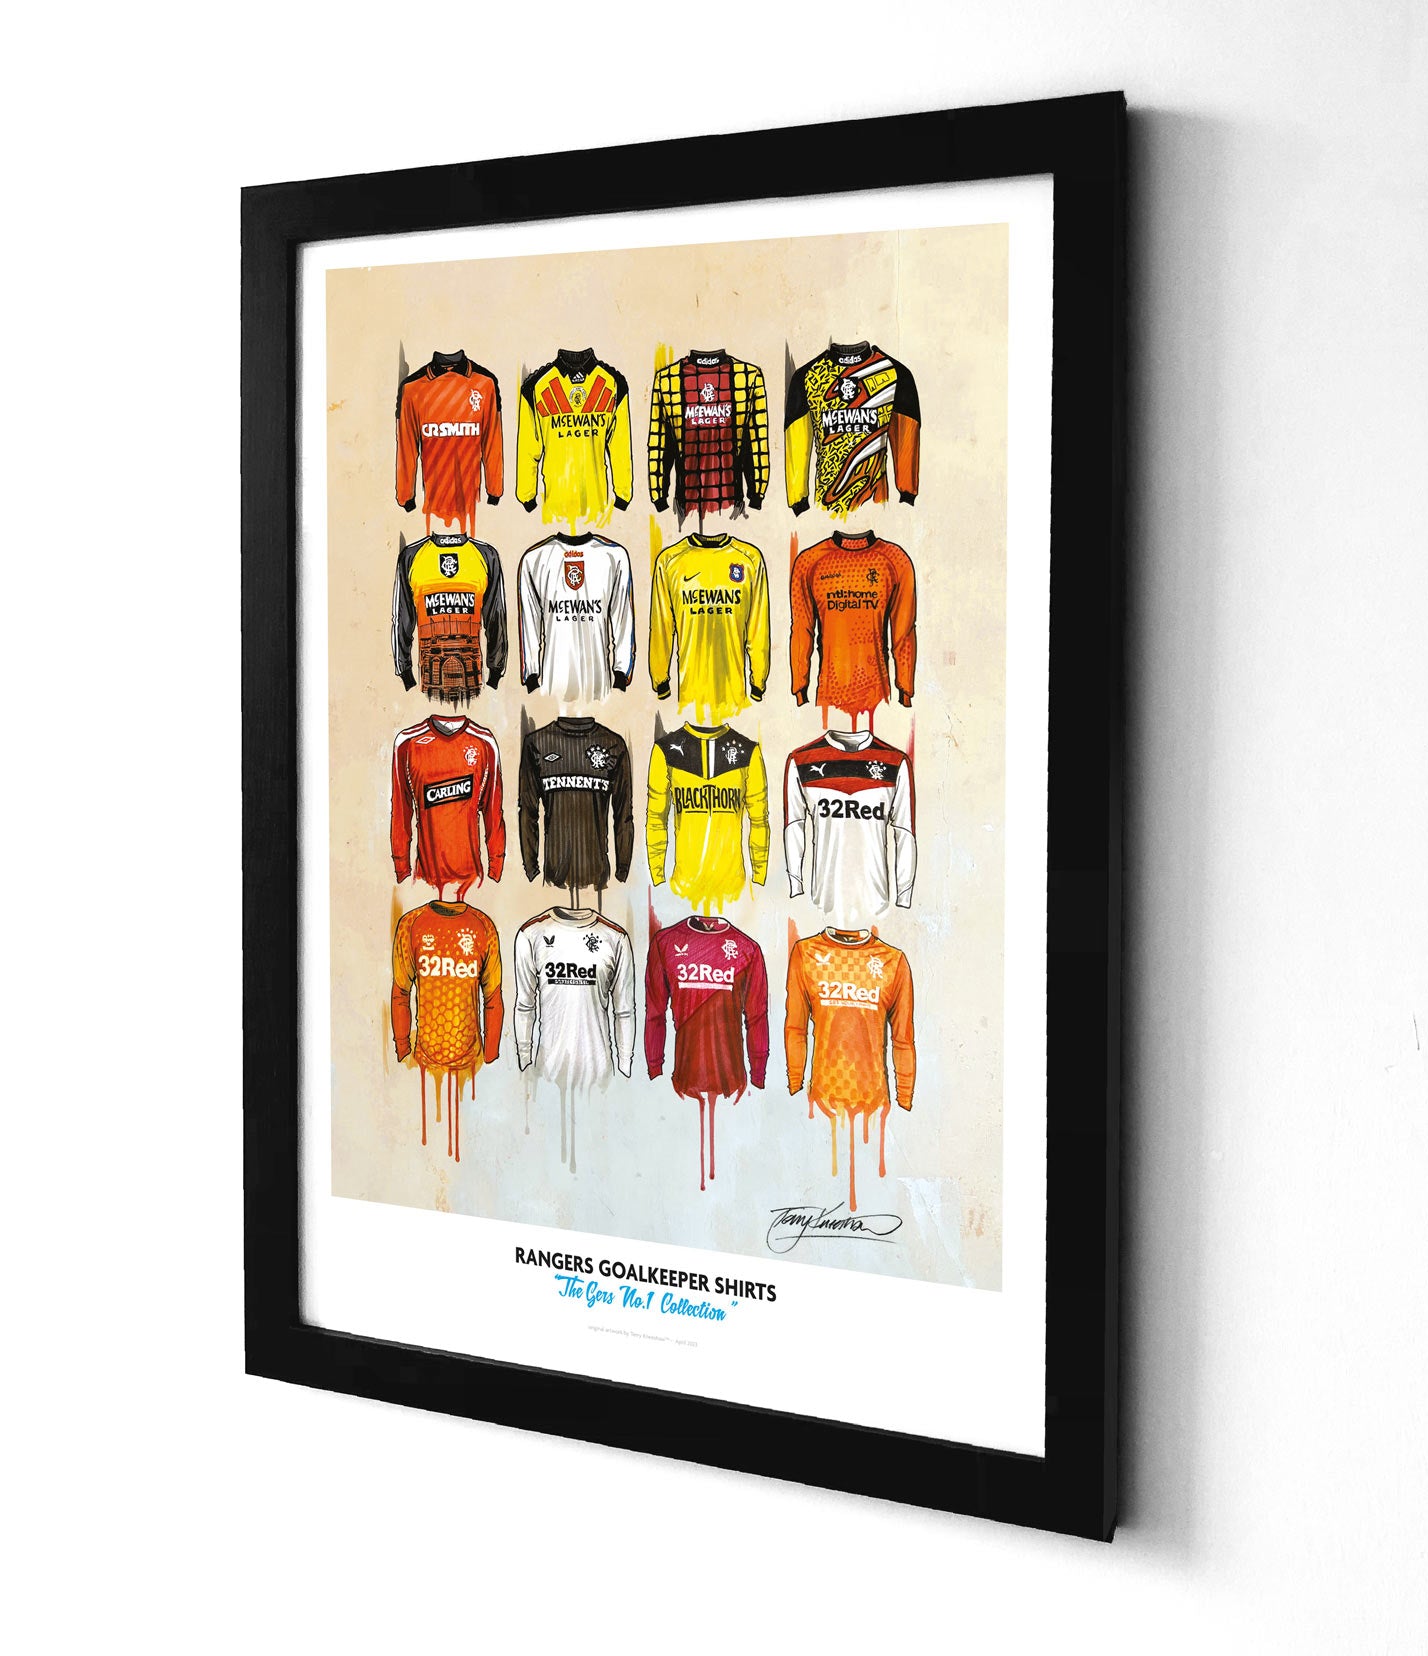 Terry Kneeshaw's limited edition A2 print showcases his artwork featuring 16 different Rangers Football Club Goal Keeper jerseys from various eras. With only 25 prints available,.